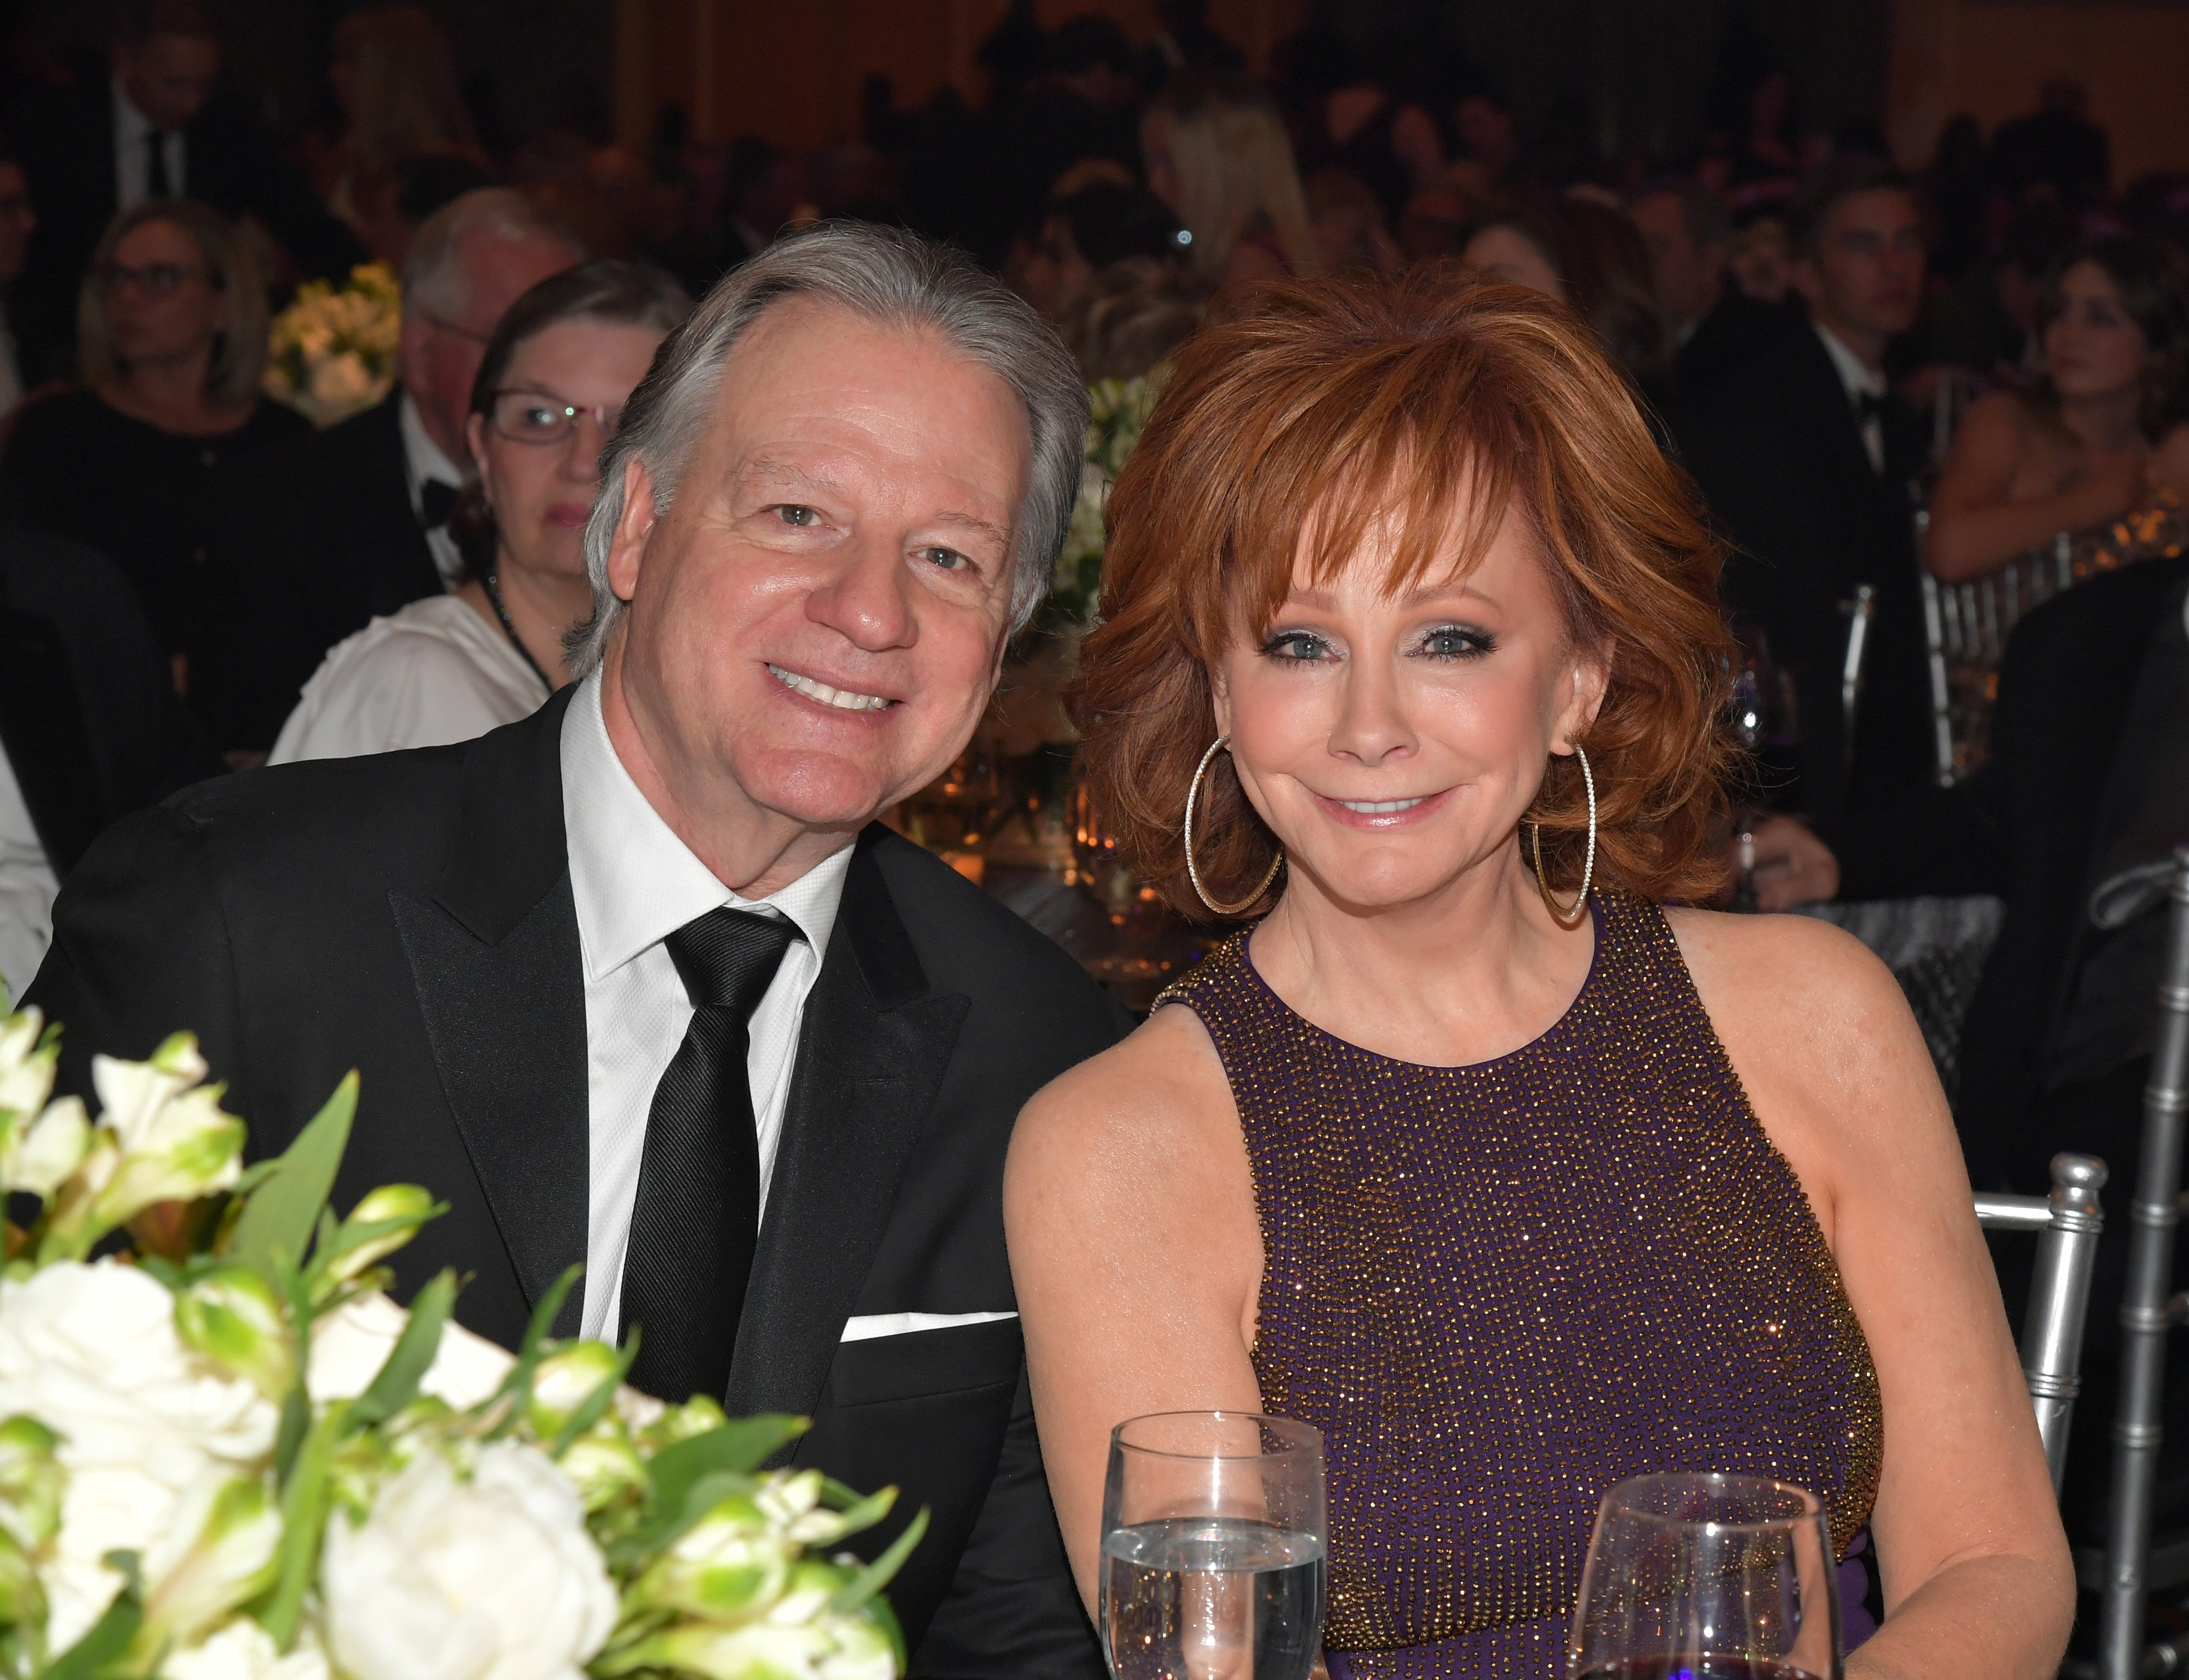 Reba McEntire and Anthony "Skeeter" Lasuzzo attend Celebrity Fight Night in Phoenix, Arizona on March 23, 2019 | Photo: Getty Images